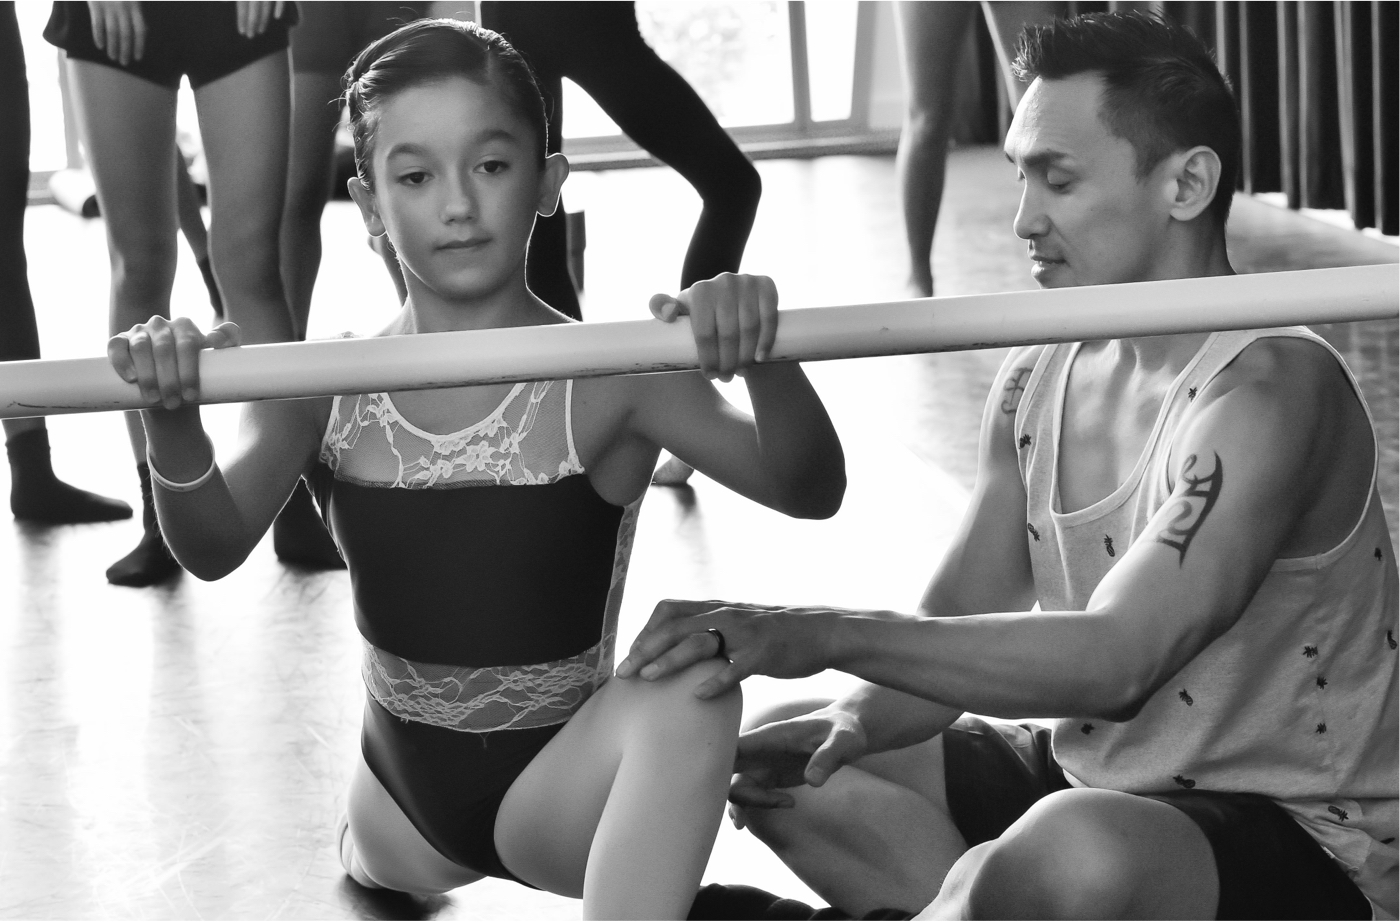 Francisco Gella helping a young dancer stretch at the barre.